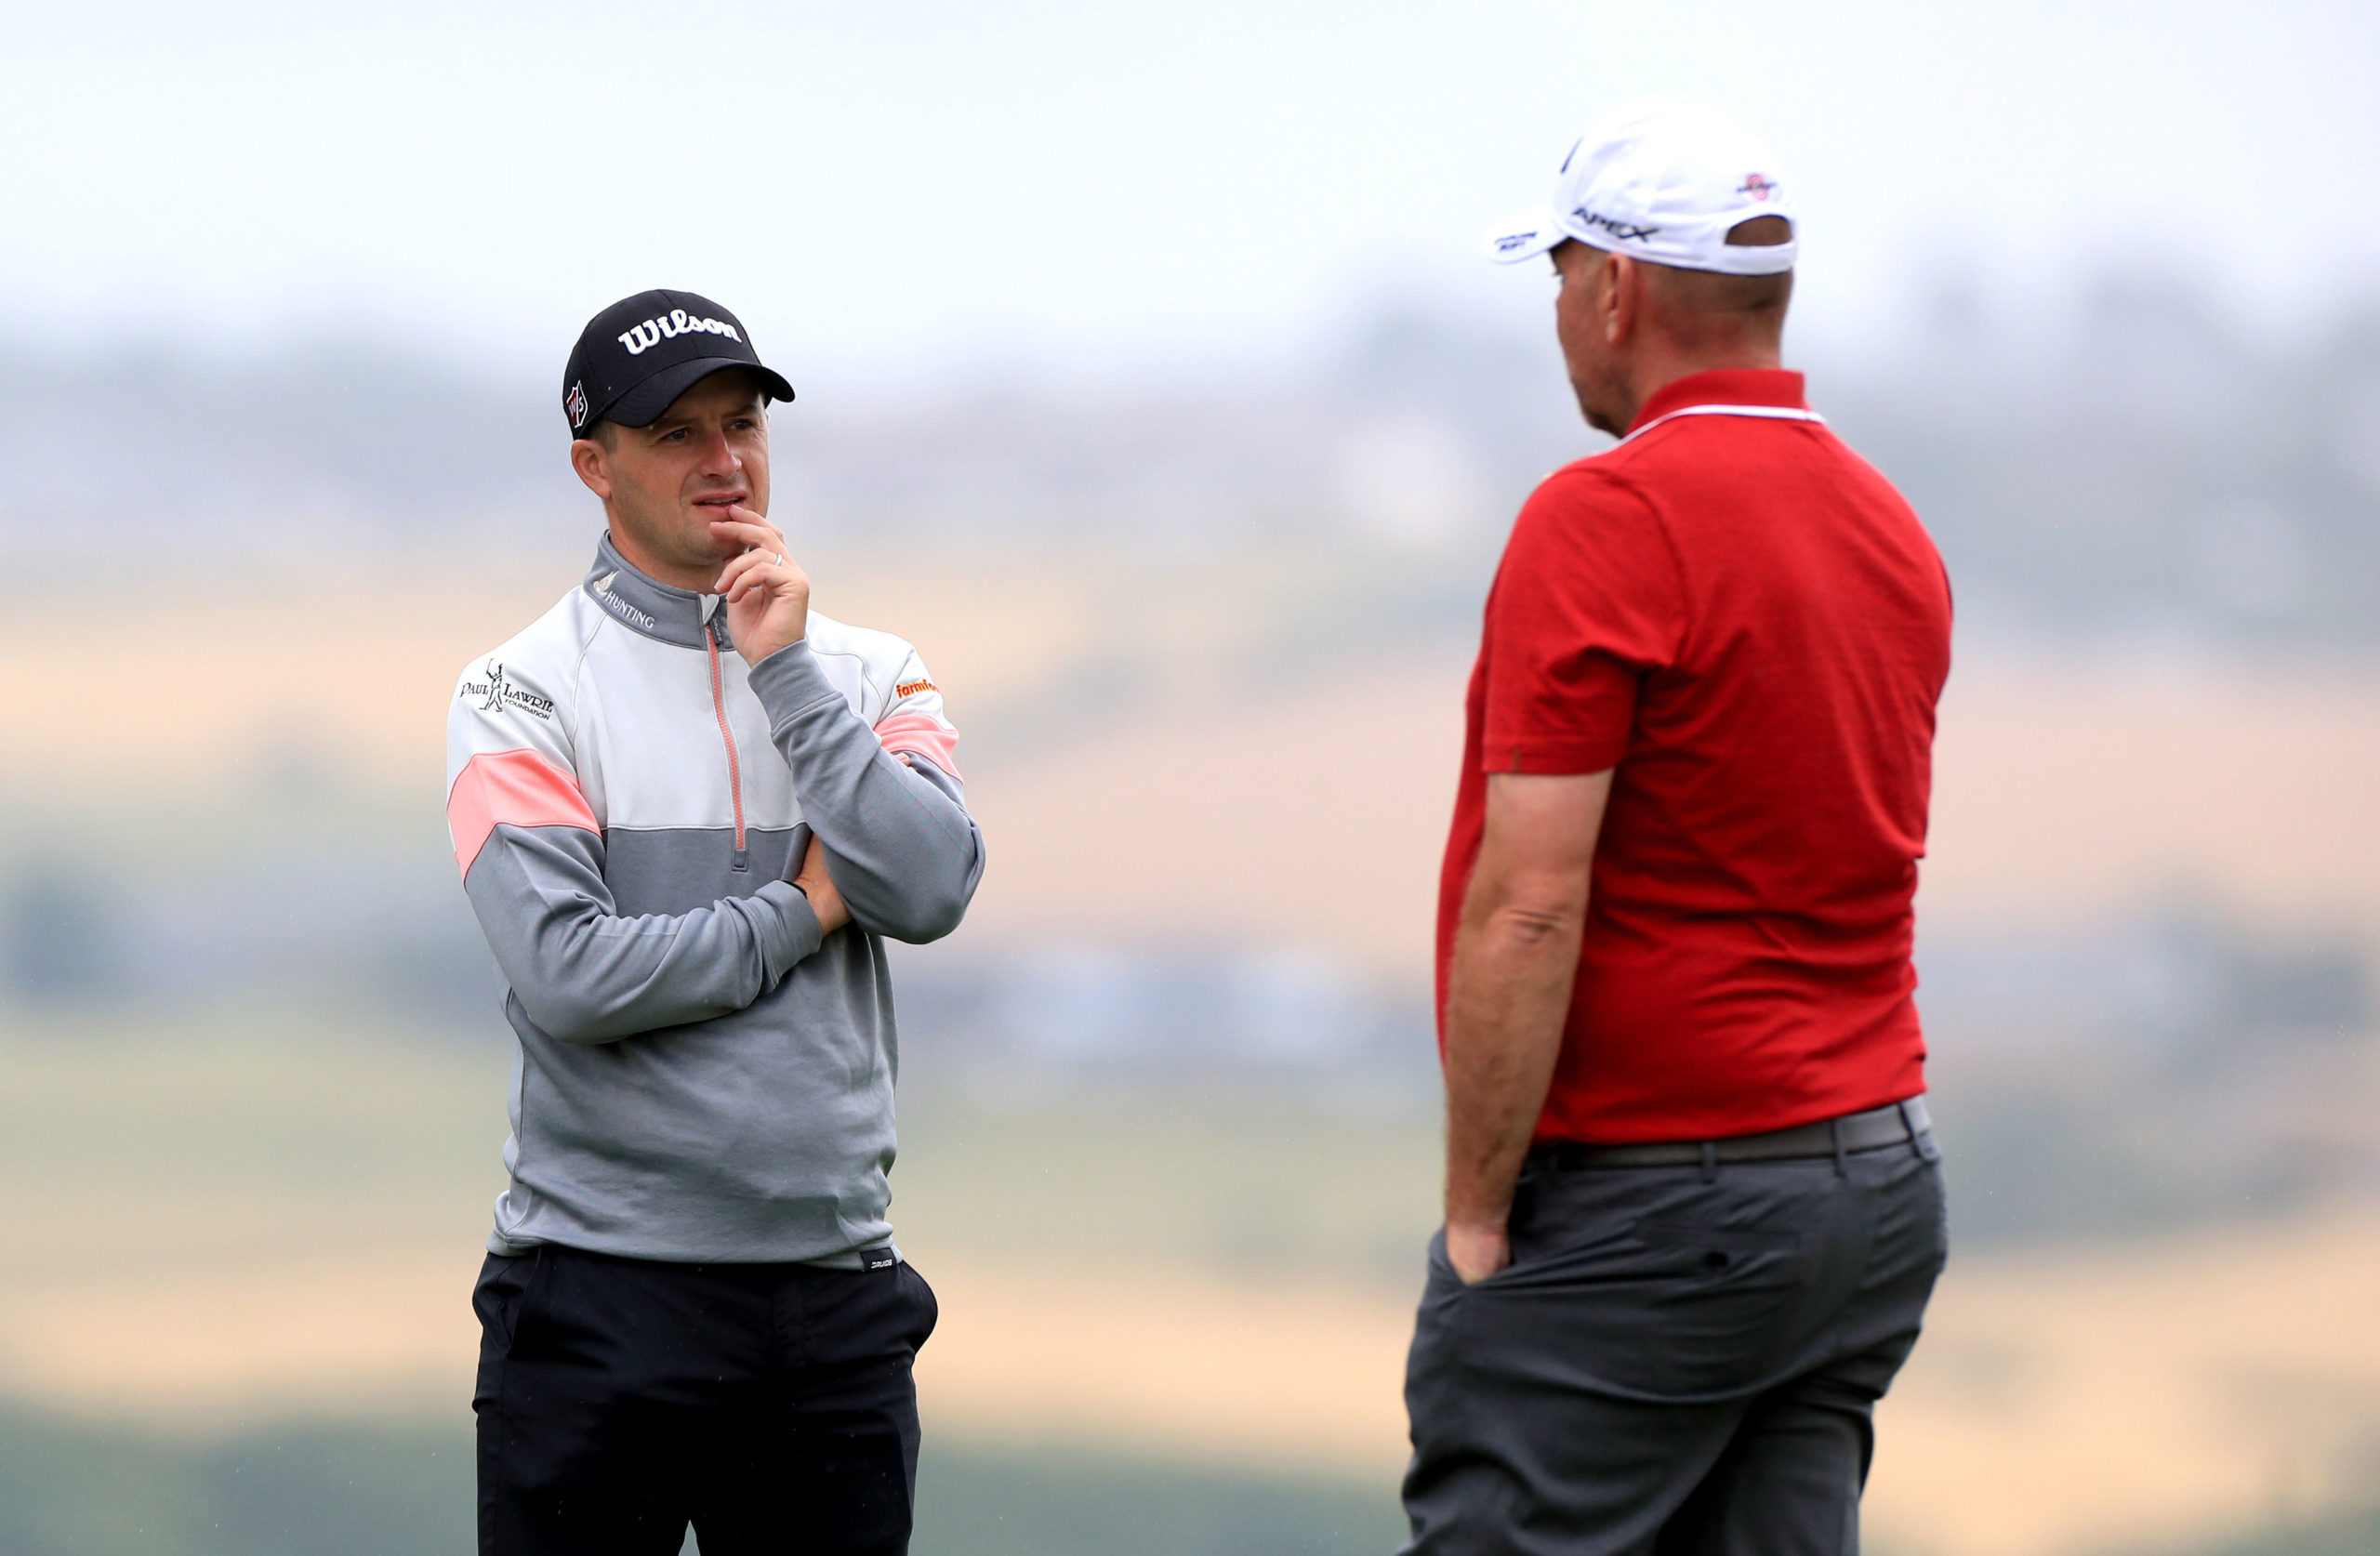 David Law has a socially-distanced chat with Ryder Cup skipper Thomas Bjorn during play at Close House.